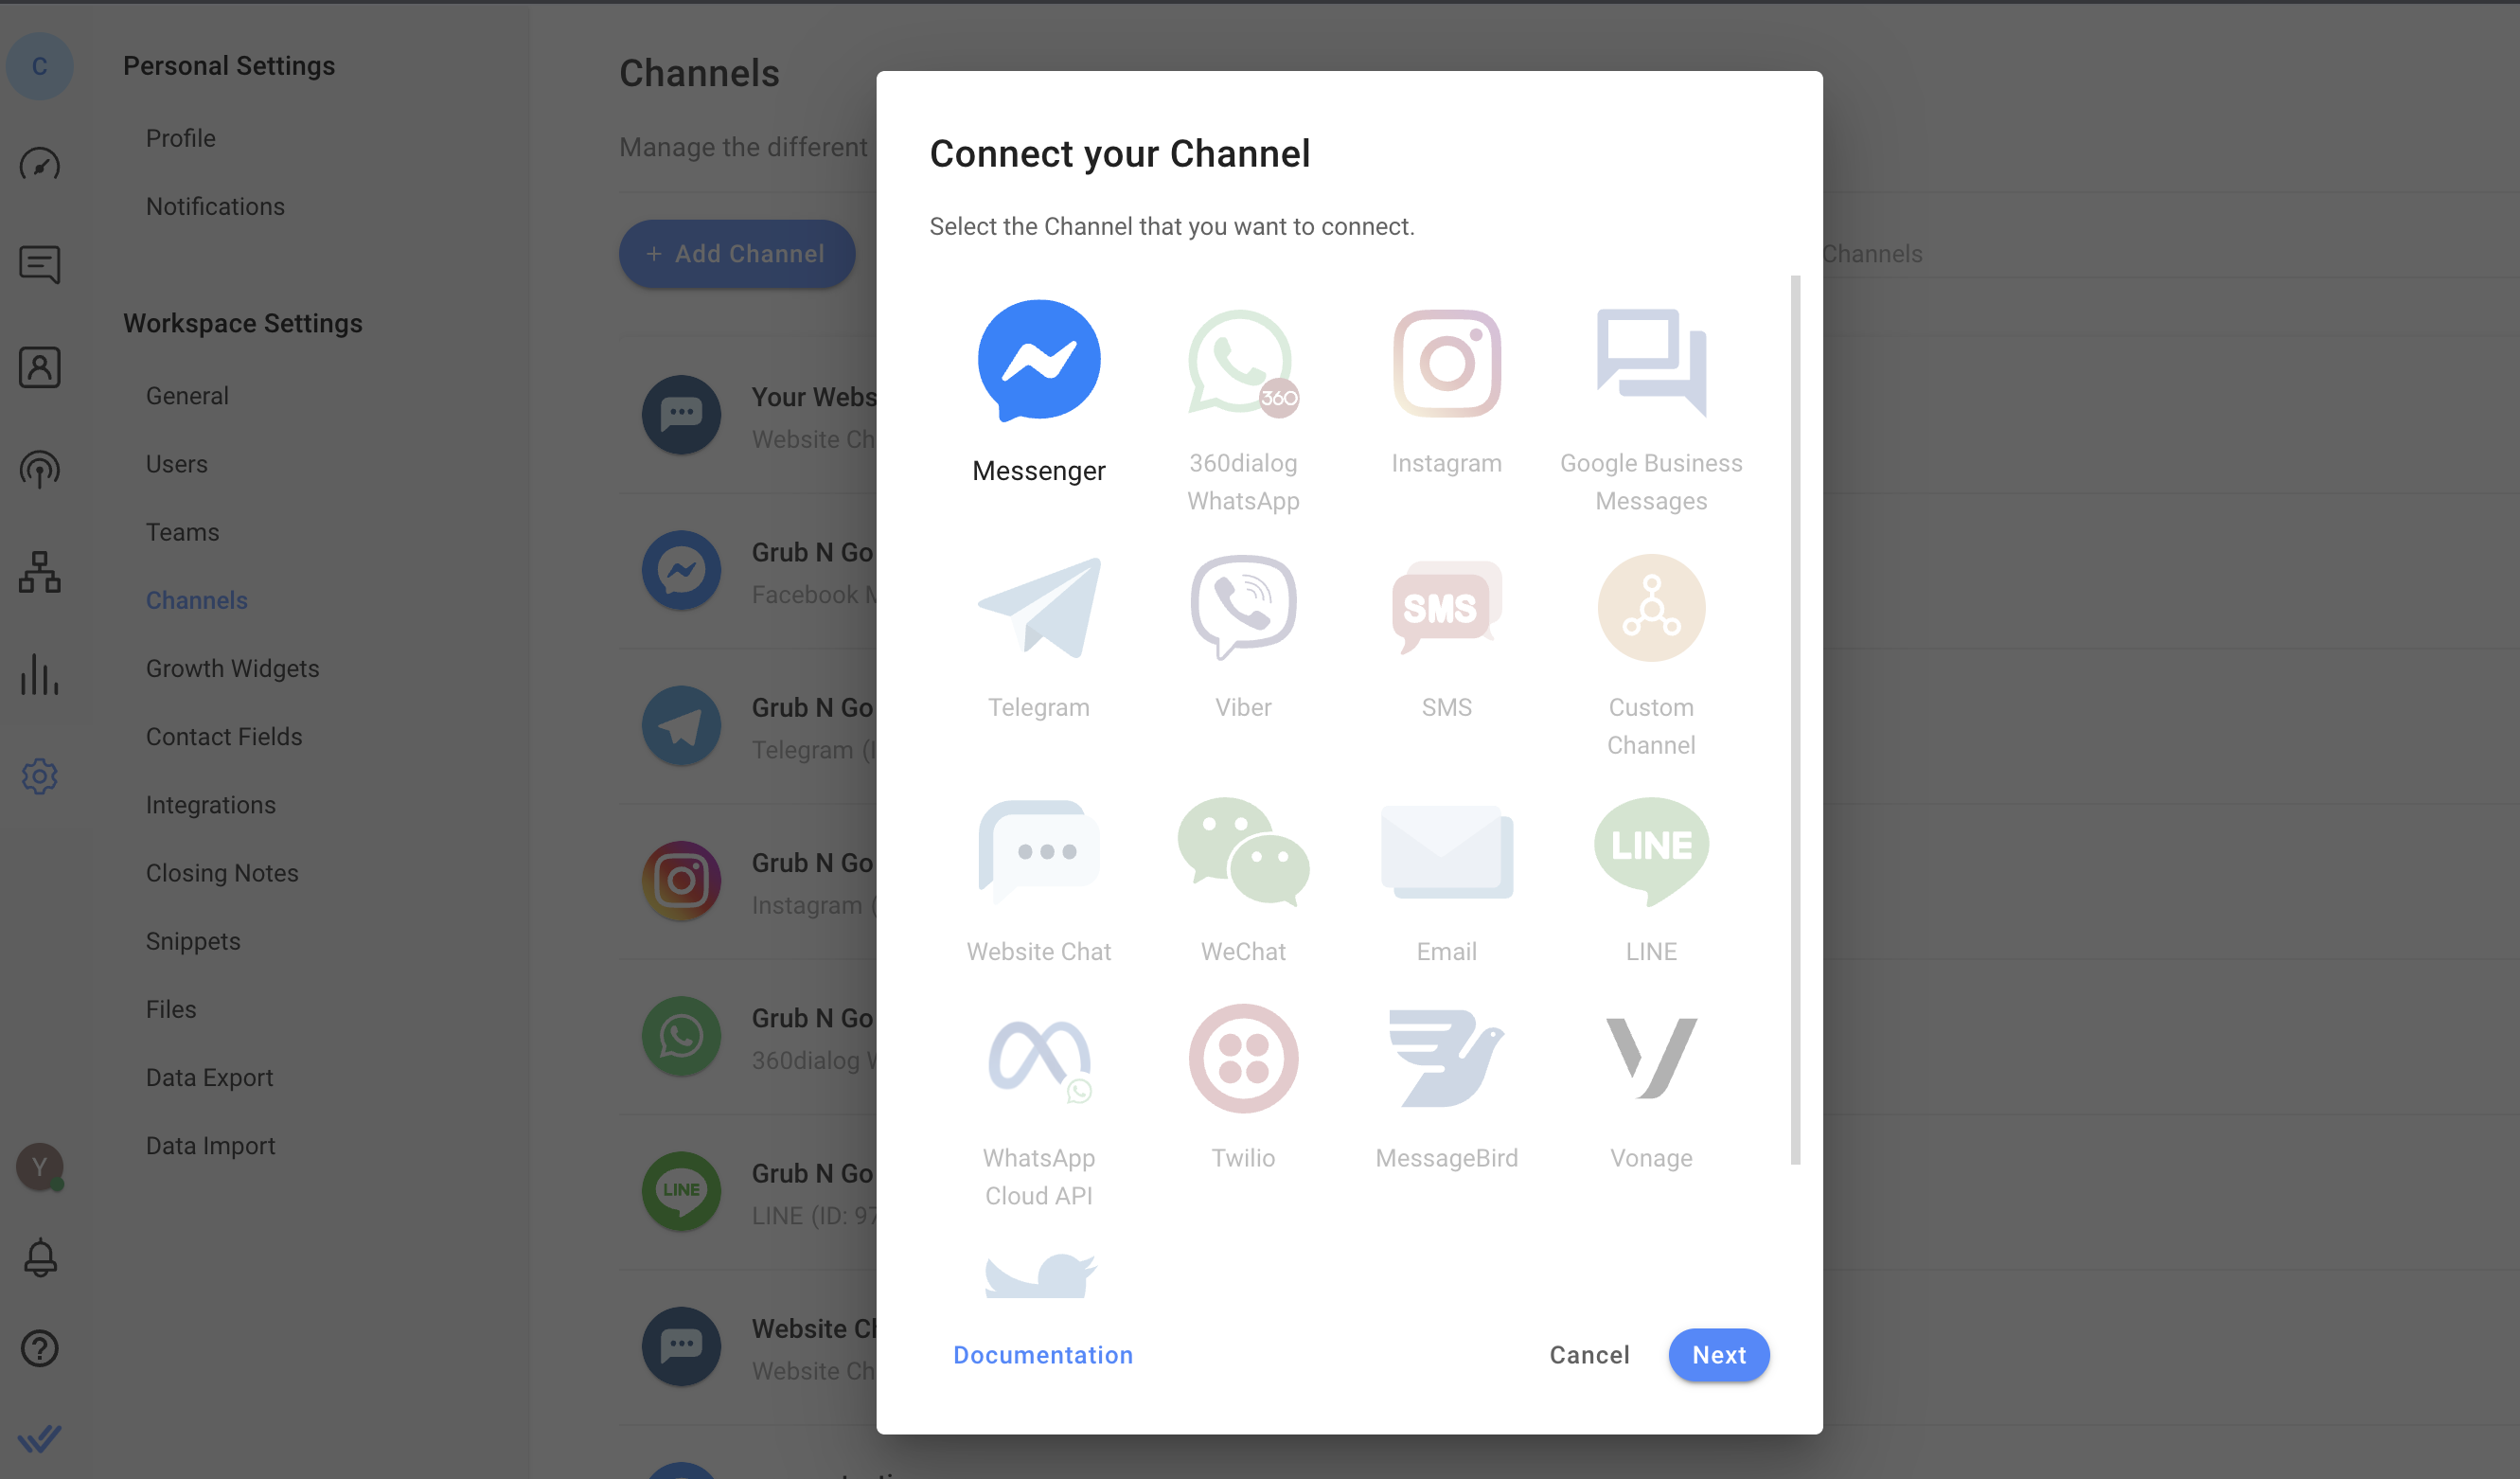 Connect your Channel dialog